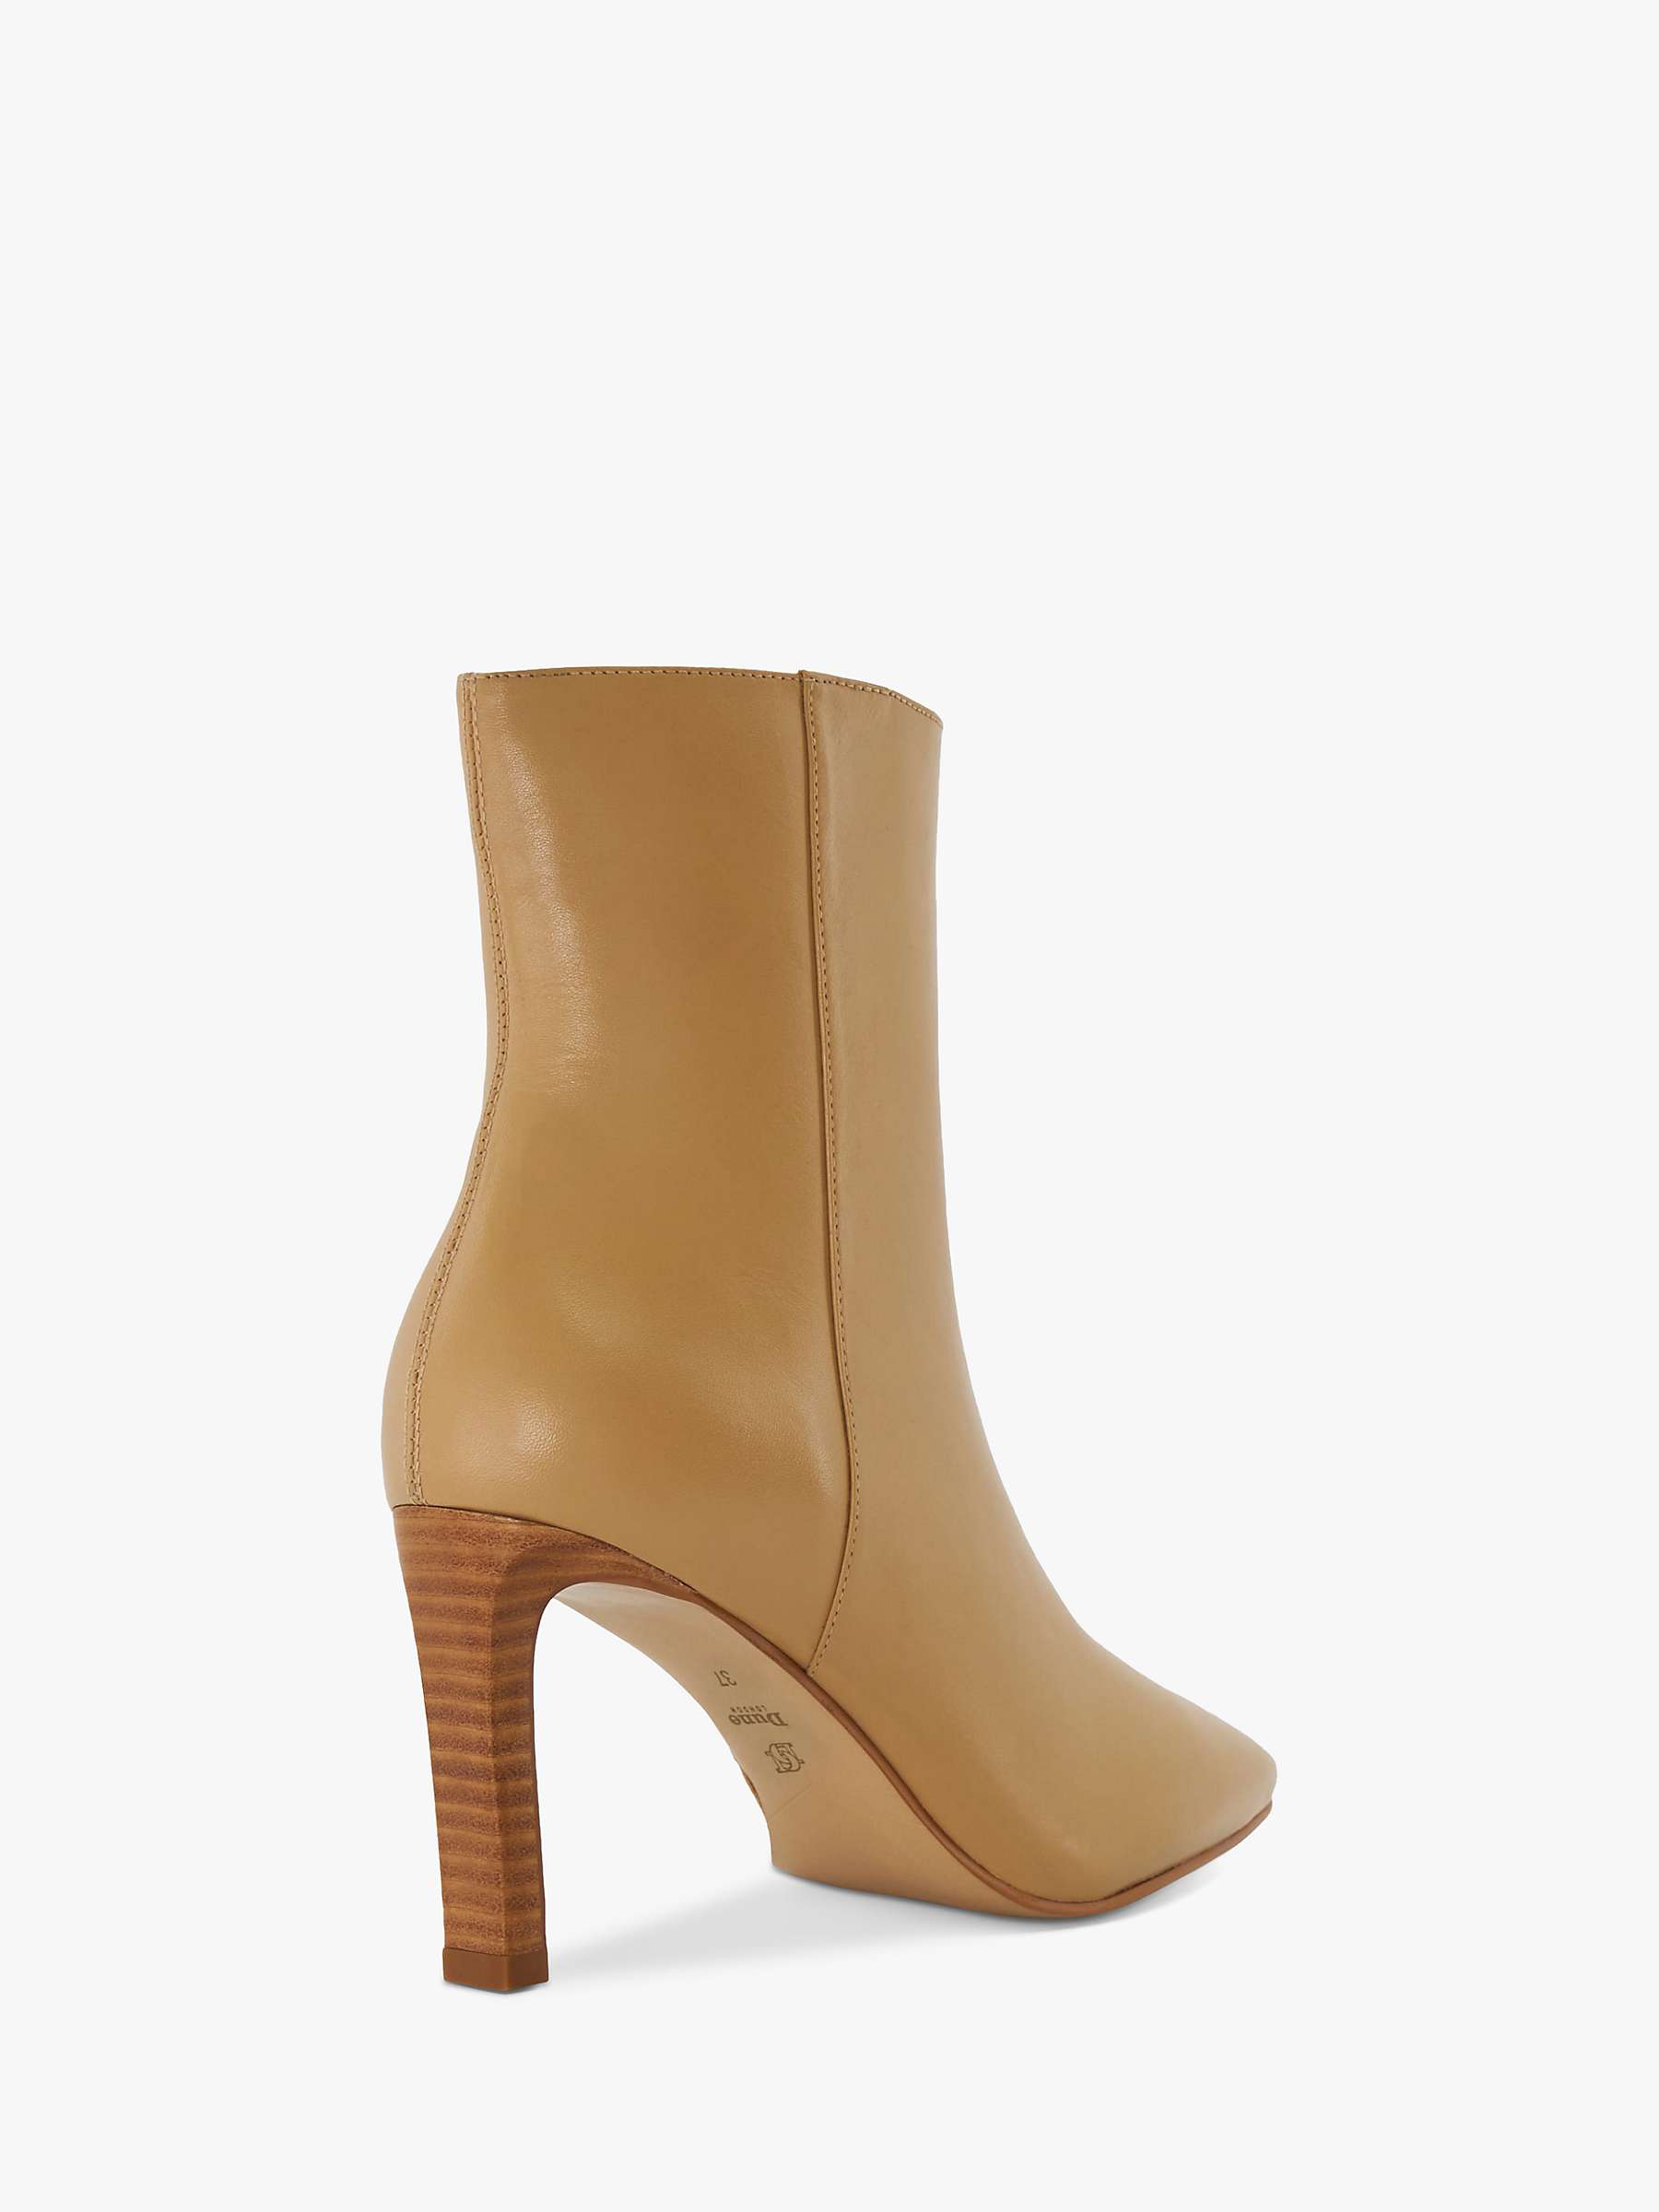 Buy Dune Oxygen Leather Ankle Boots, Camel Online at johnlewis.com